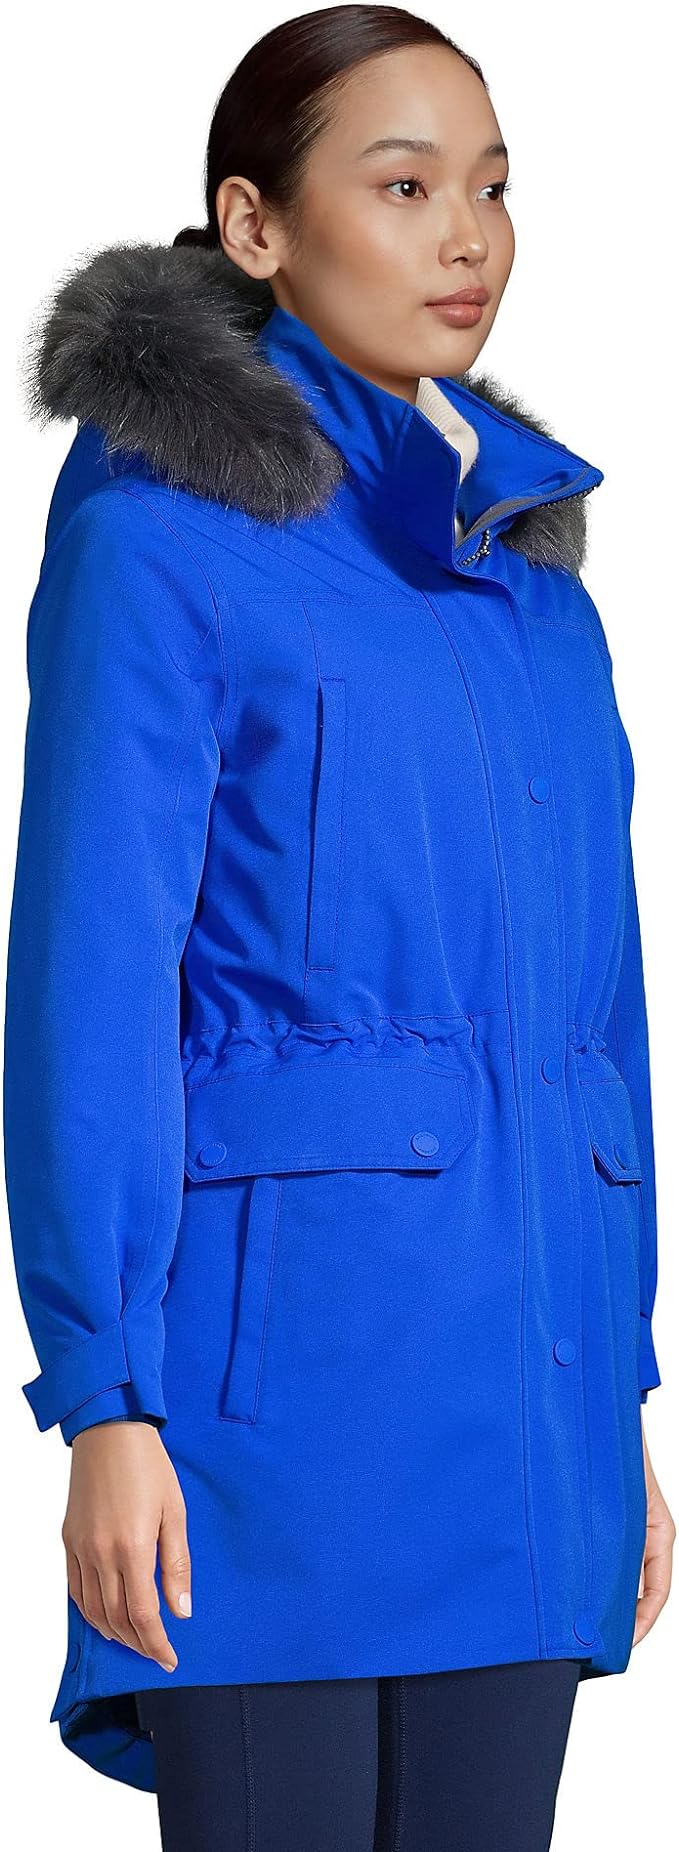 Lands' End Ladies' Expedition Waterproof Down Winter Parka with Faux Fur Hood